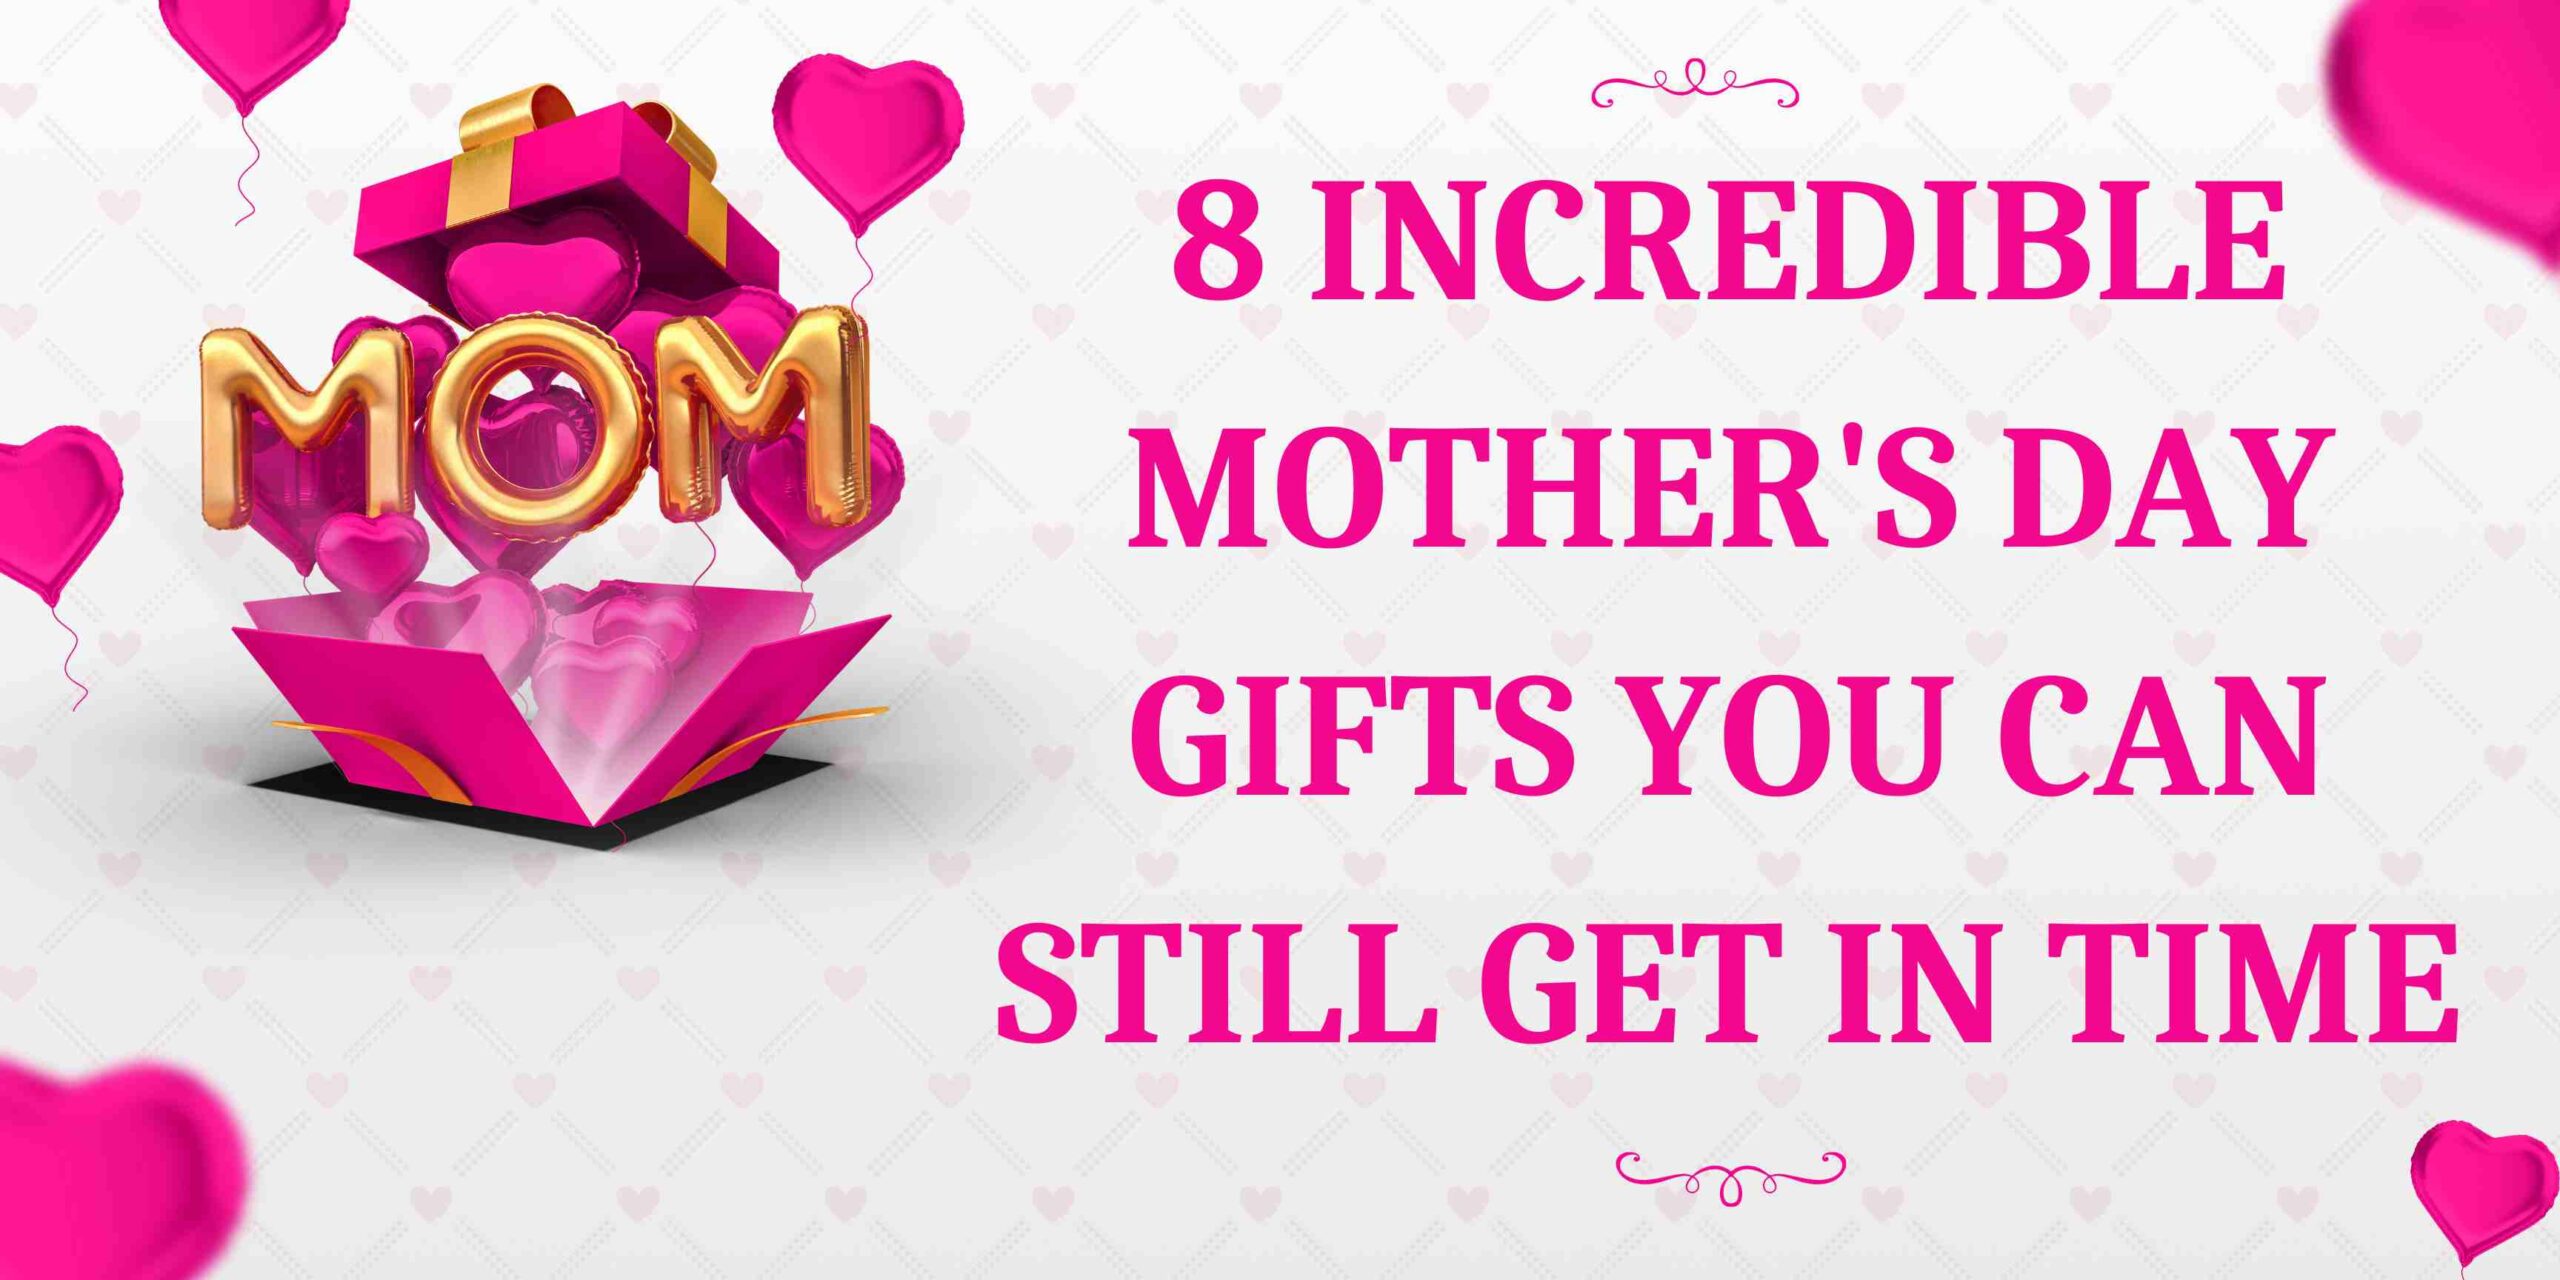 8 Incredible Mother’s Day Gifts You Can Still Get In Time